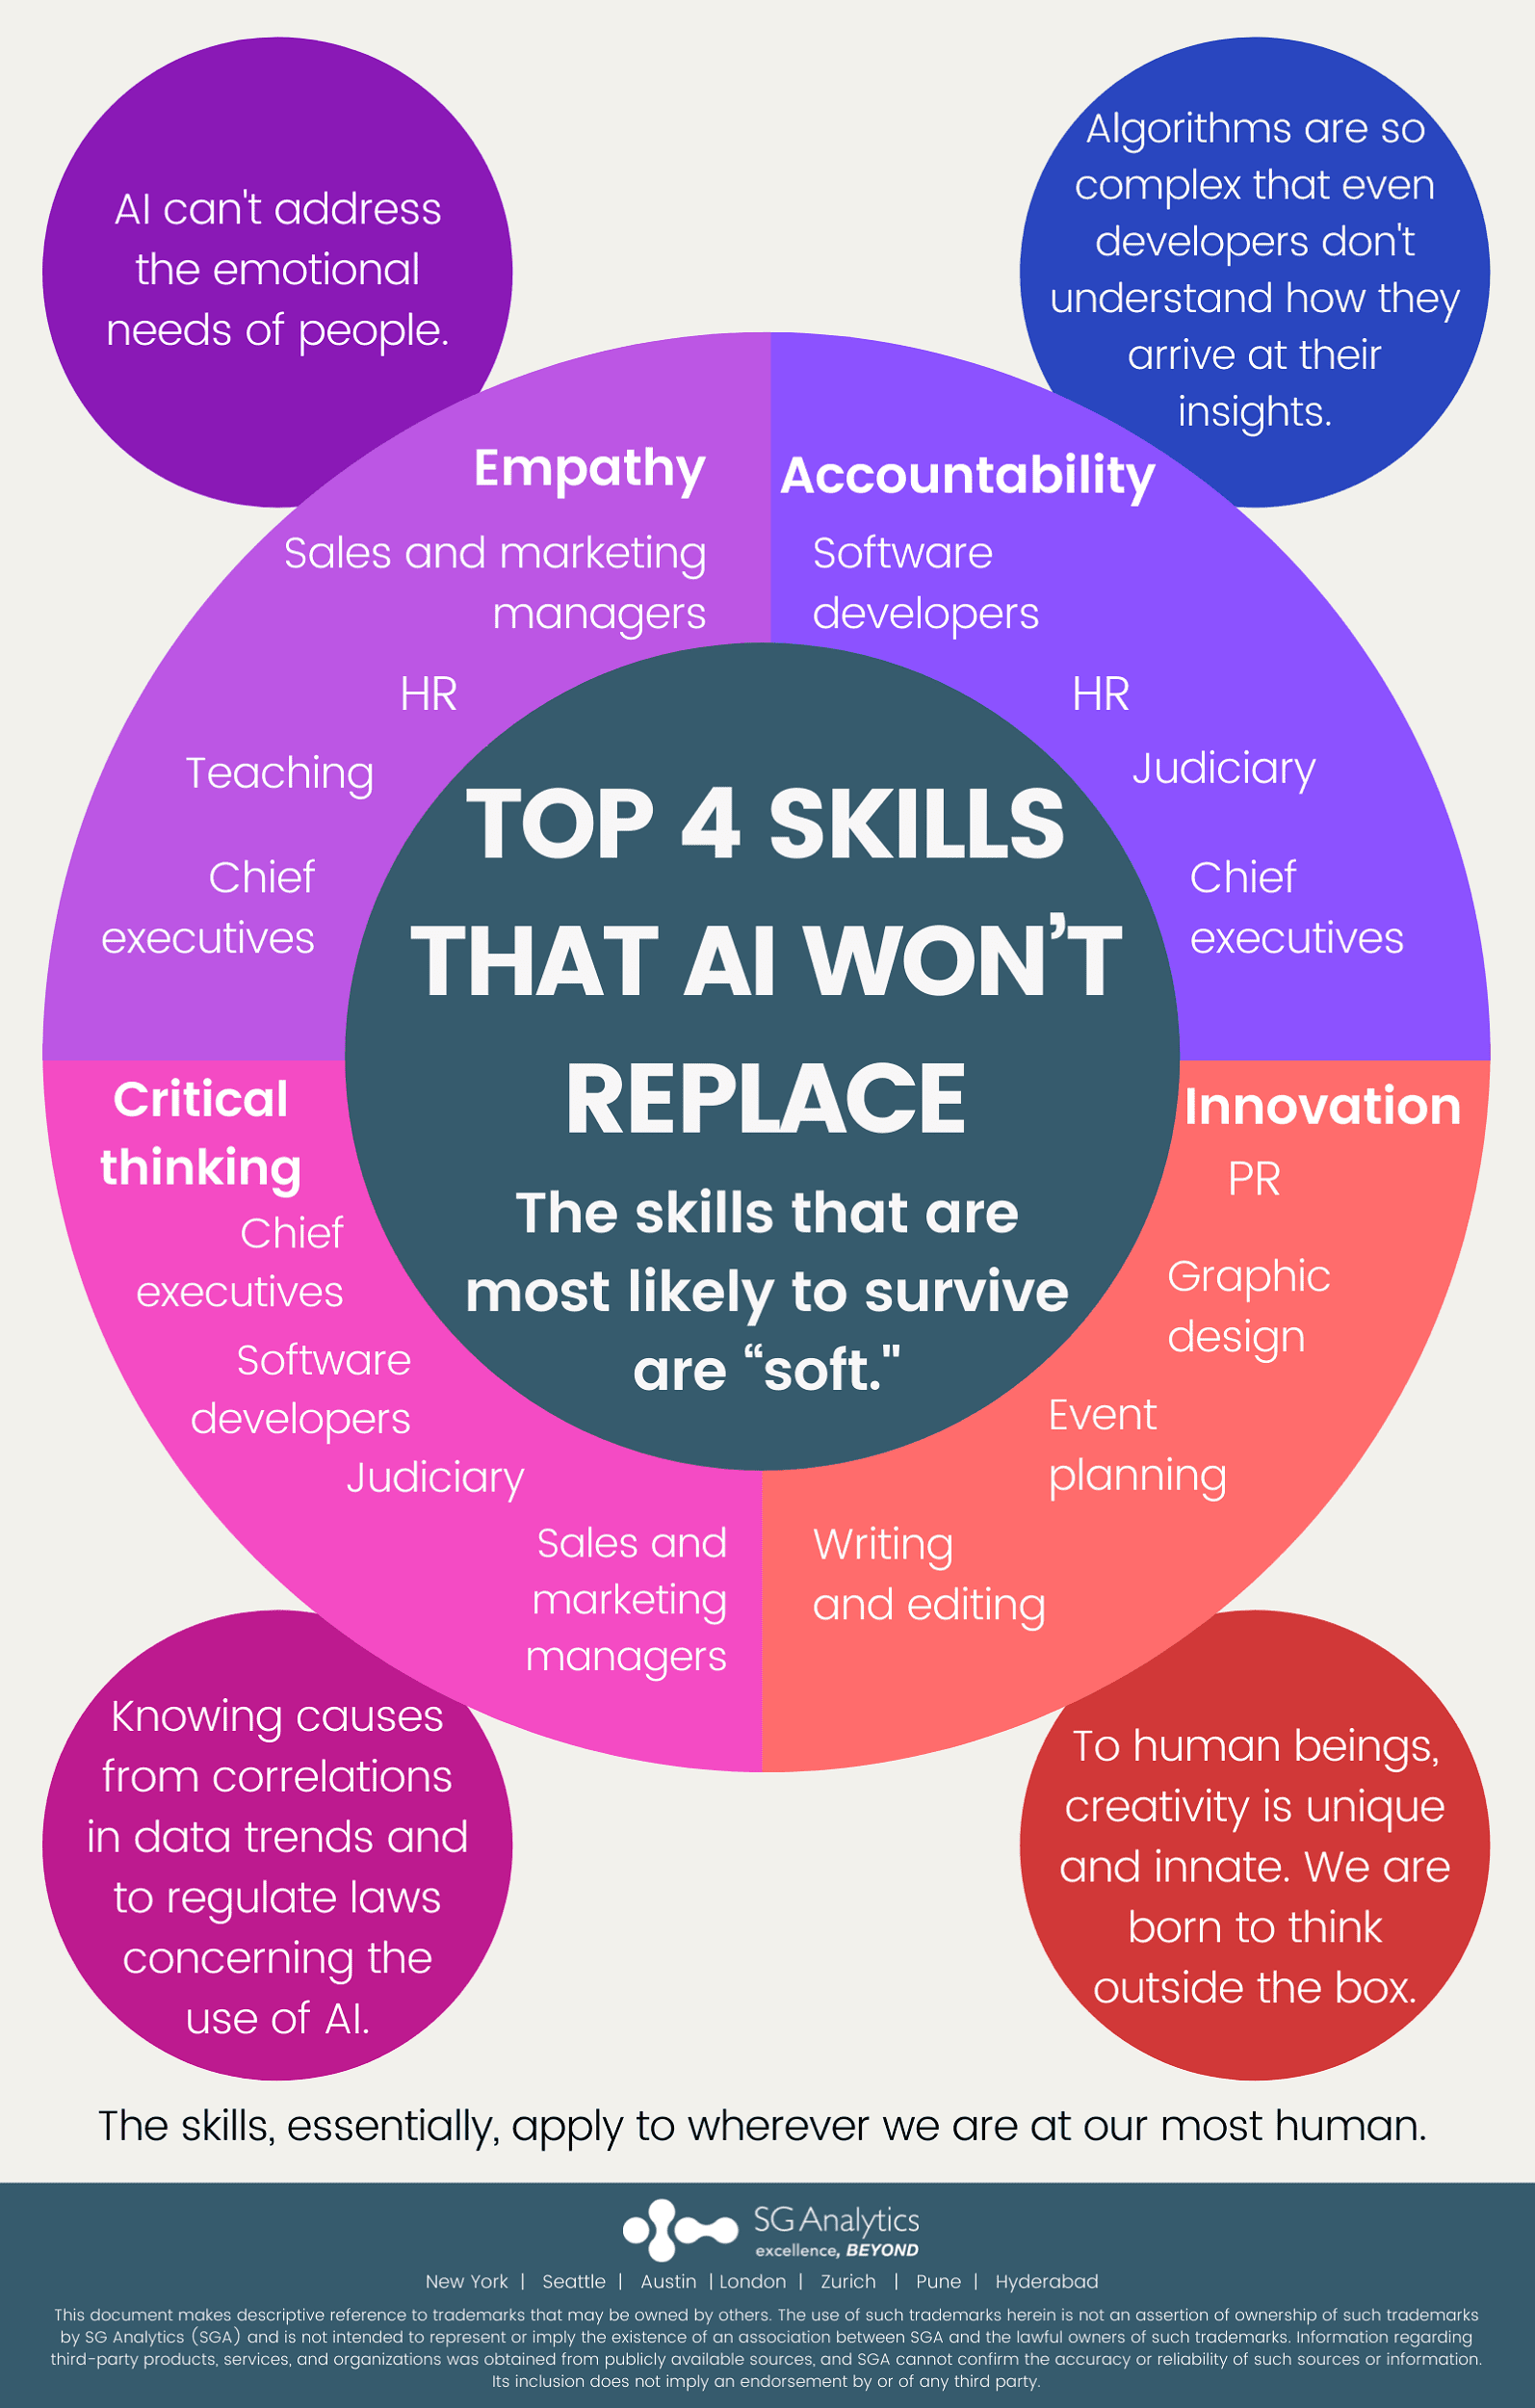 List of skills that AI can not replace